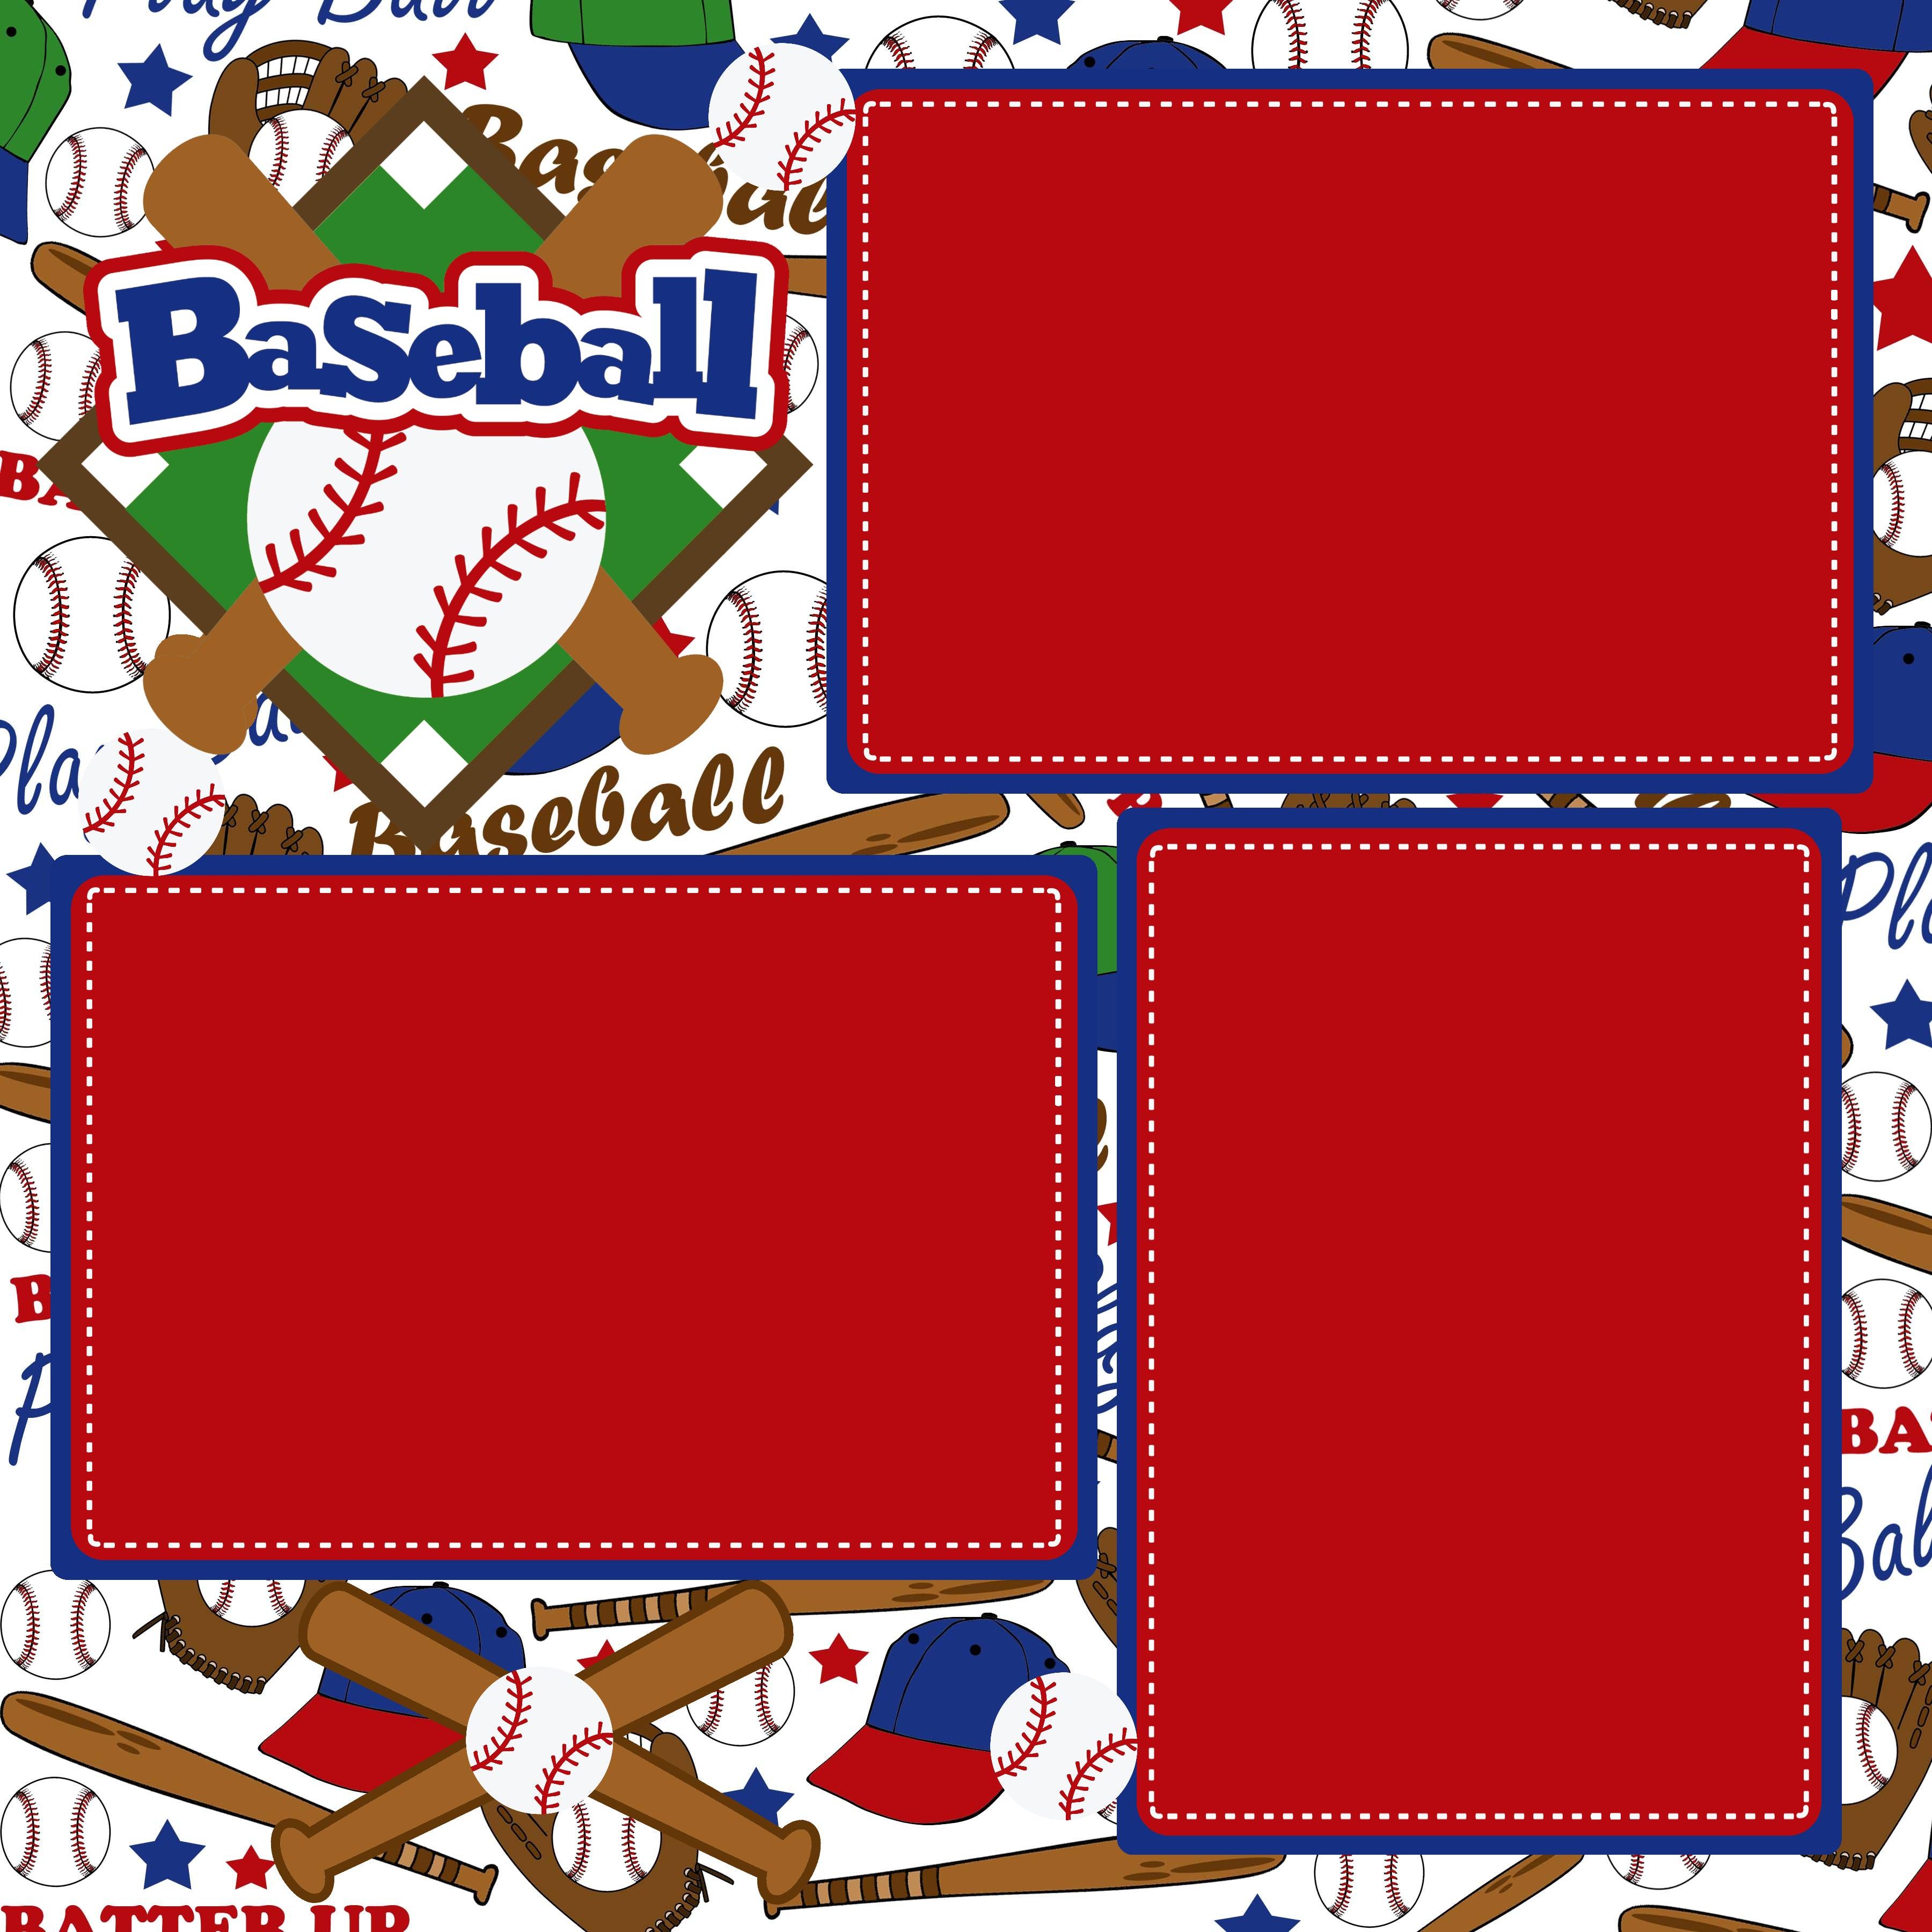 Baseball Home Run (2) - 12 x 12 Premade, Printed Scrapbook Pages by SSC Designs - Scrapbook Supply Companies